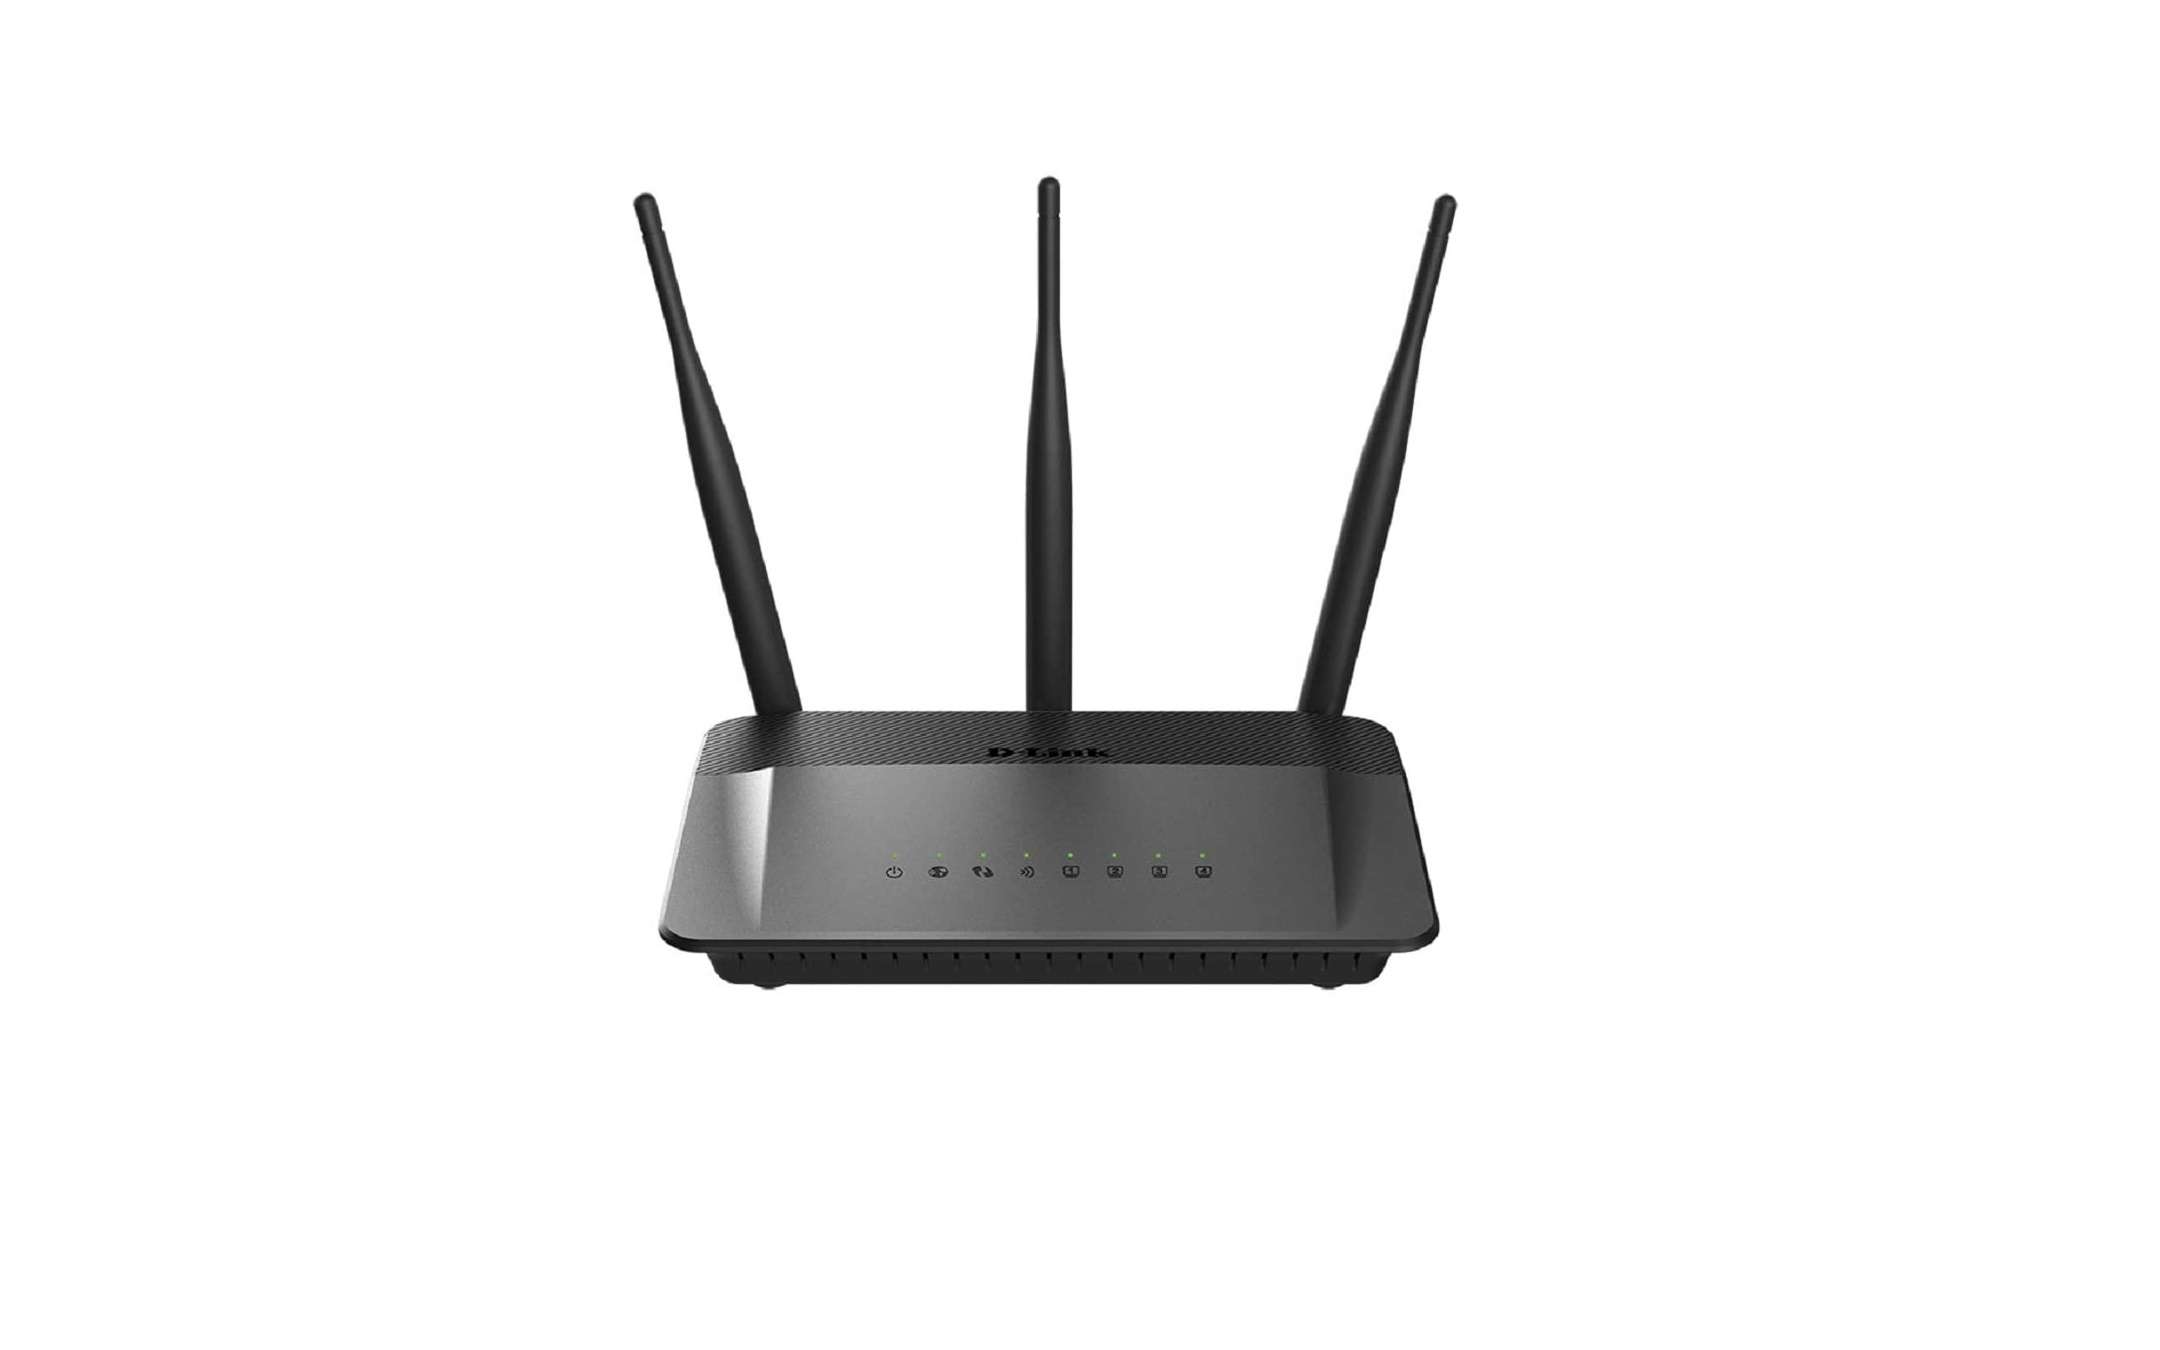 D-Link AC750 Wireless Router for less than 30 euros